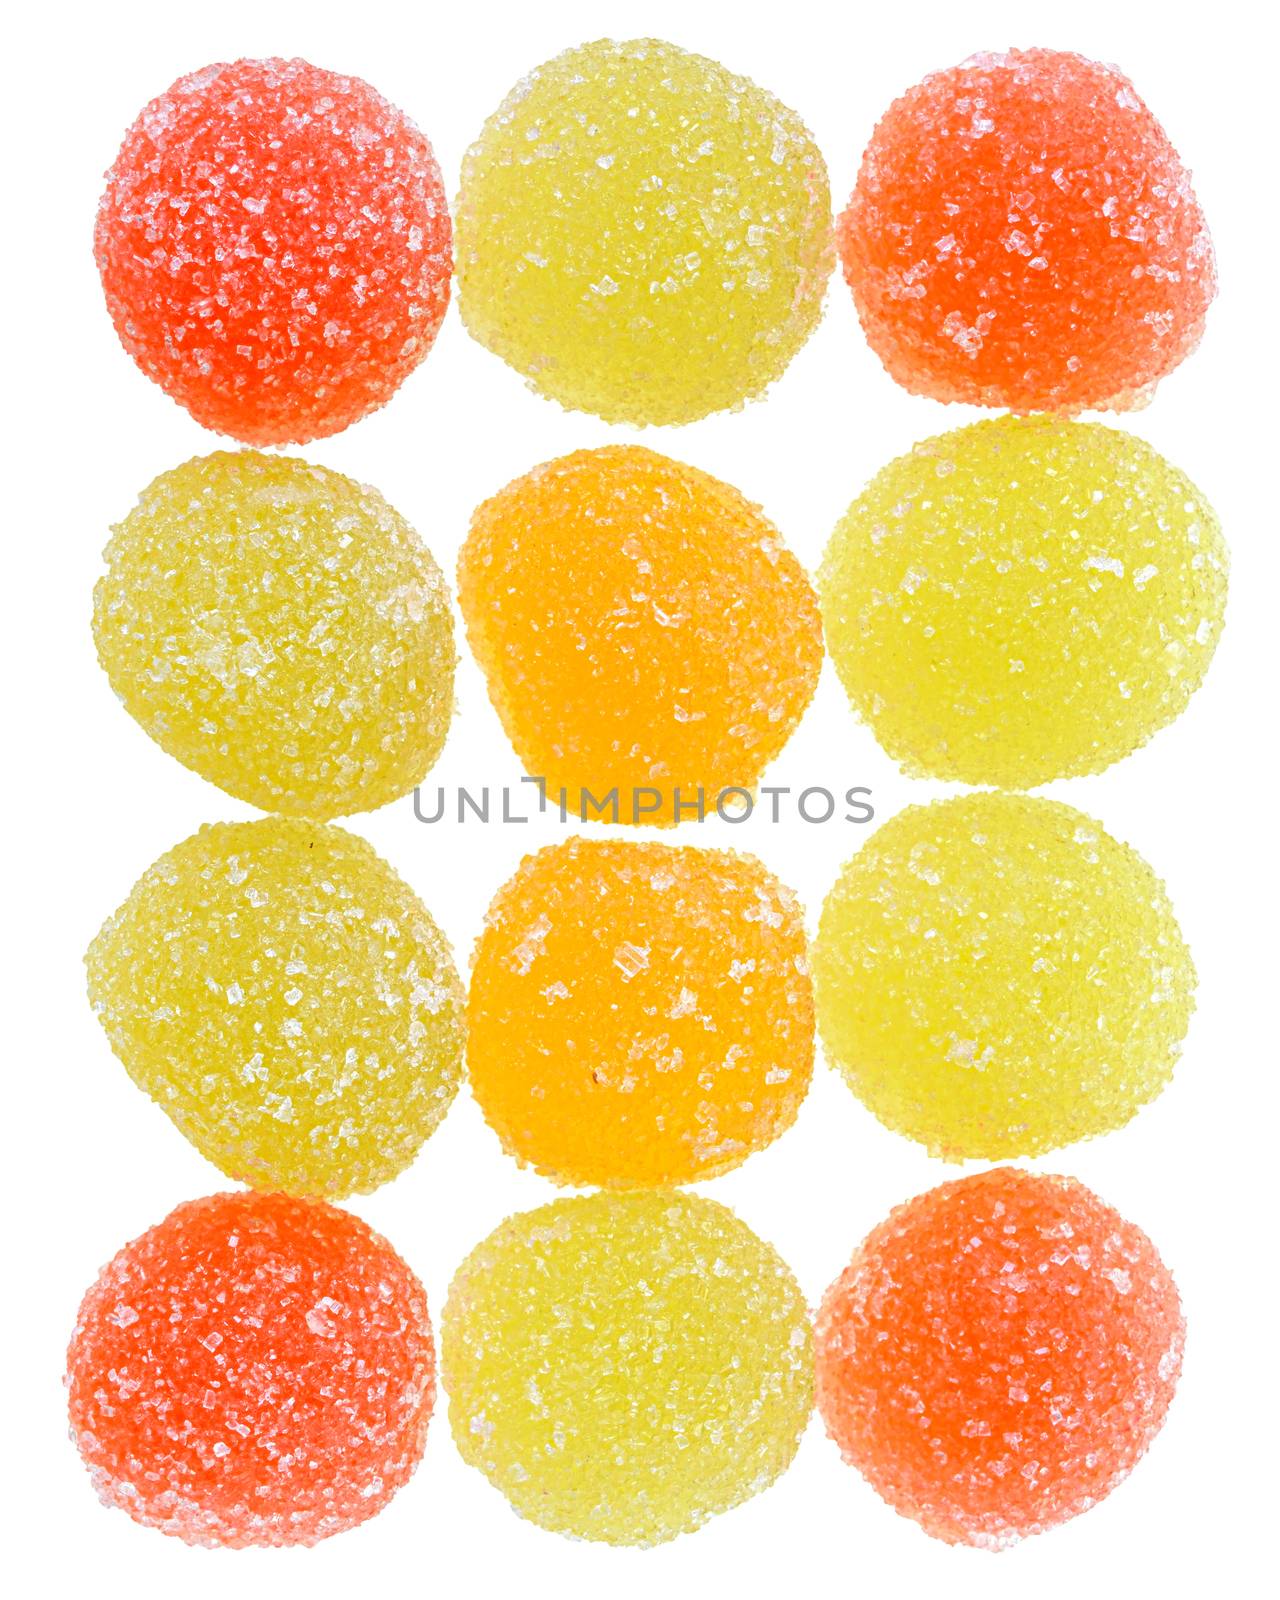 Heap multicolored candy isolated on a white background.